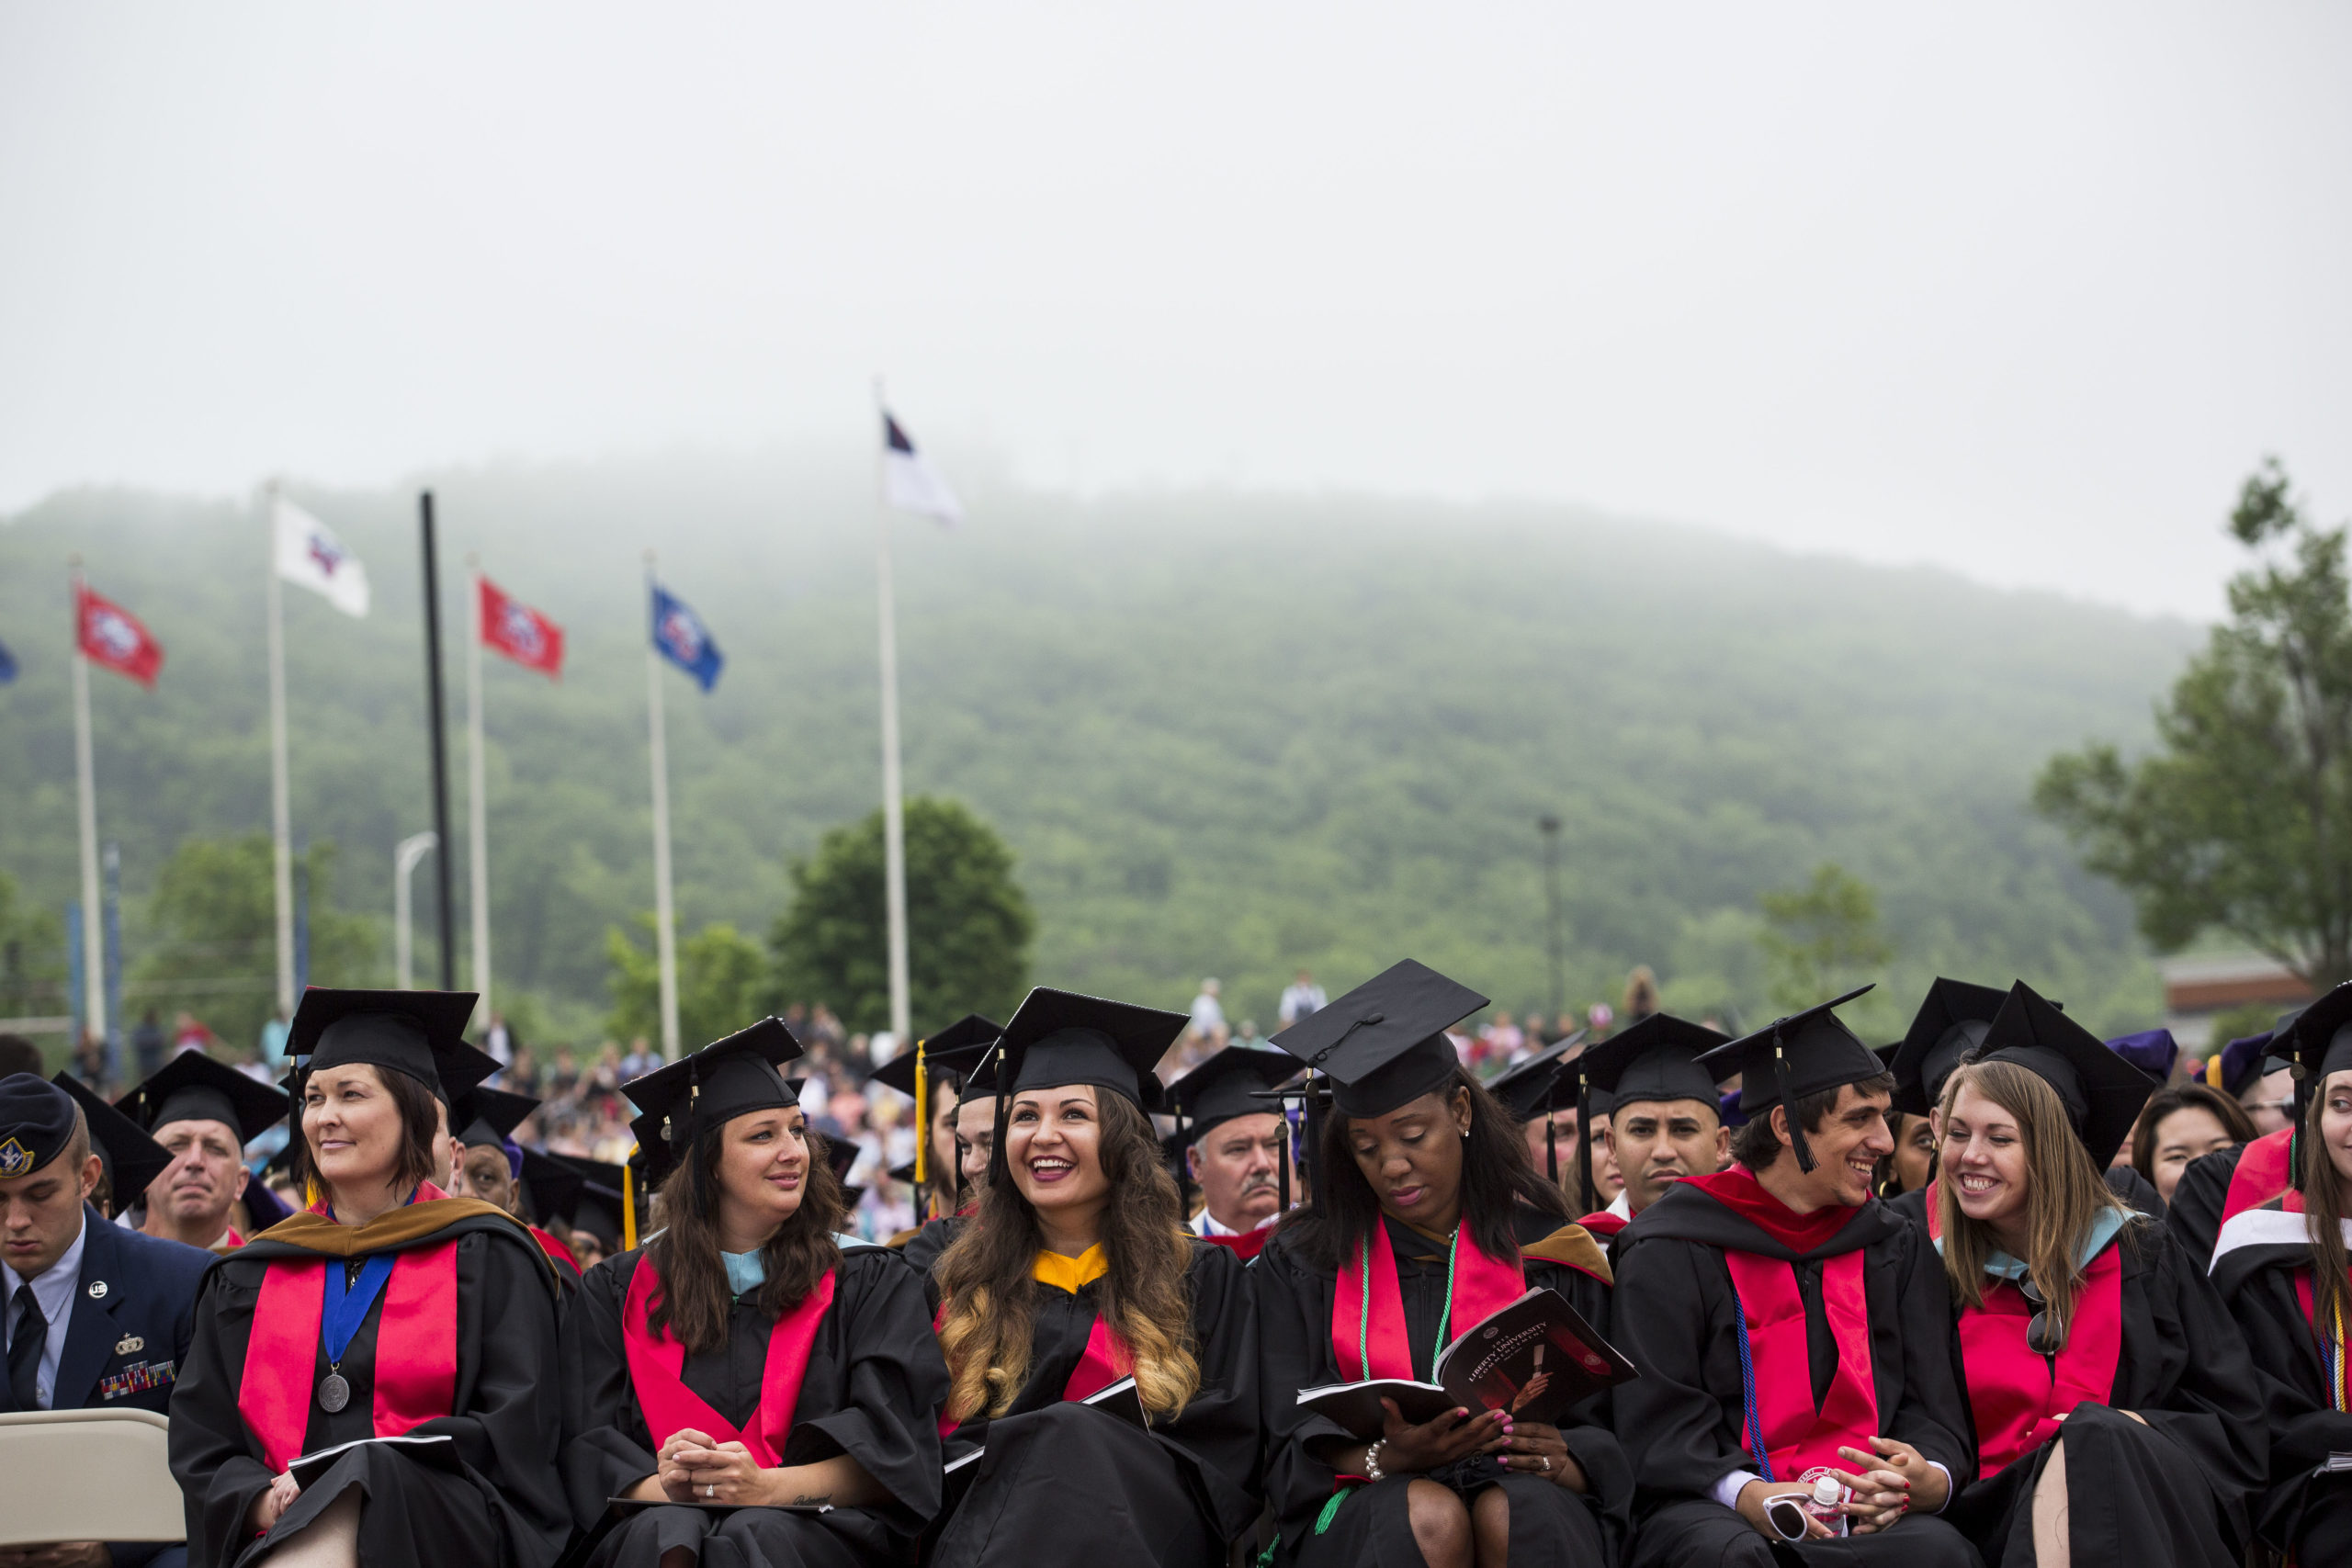 Graduates wait for the start of the commencement ceremony at Williams Stadium, where Republican U.S. presidential hopeful and former Florida governor Jeb Bush delivered the commencement address, on the campus of Liberty University, May 9, 2015 in Lynchburg, Virginia. 